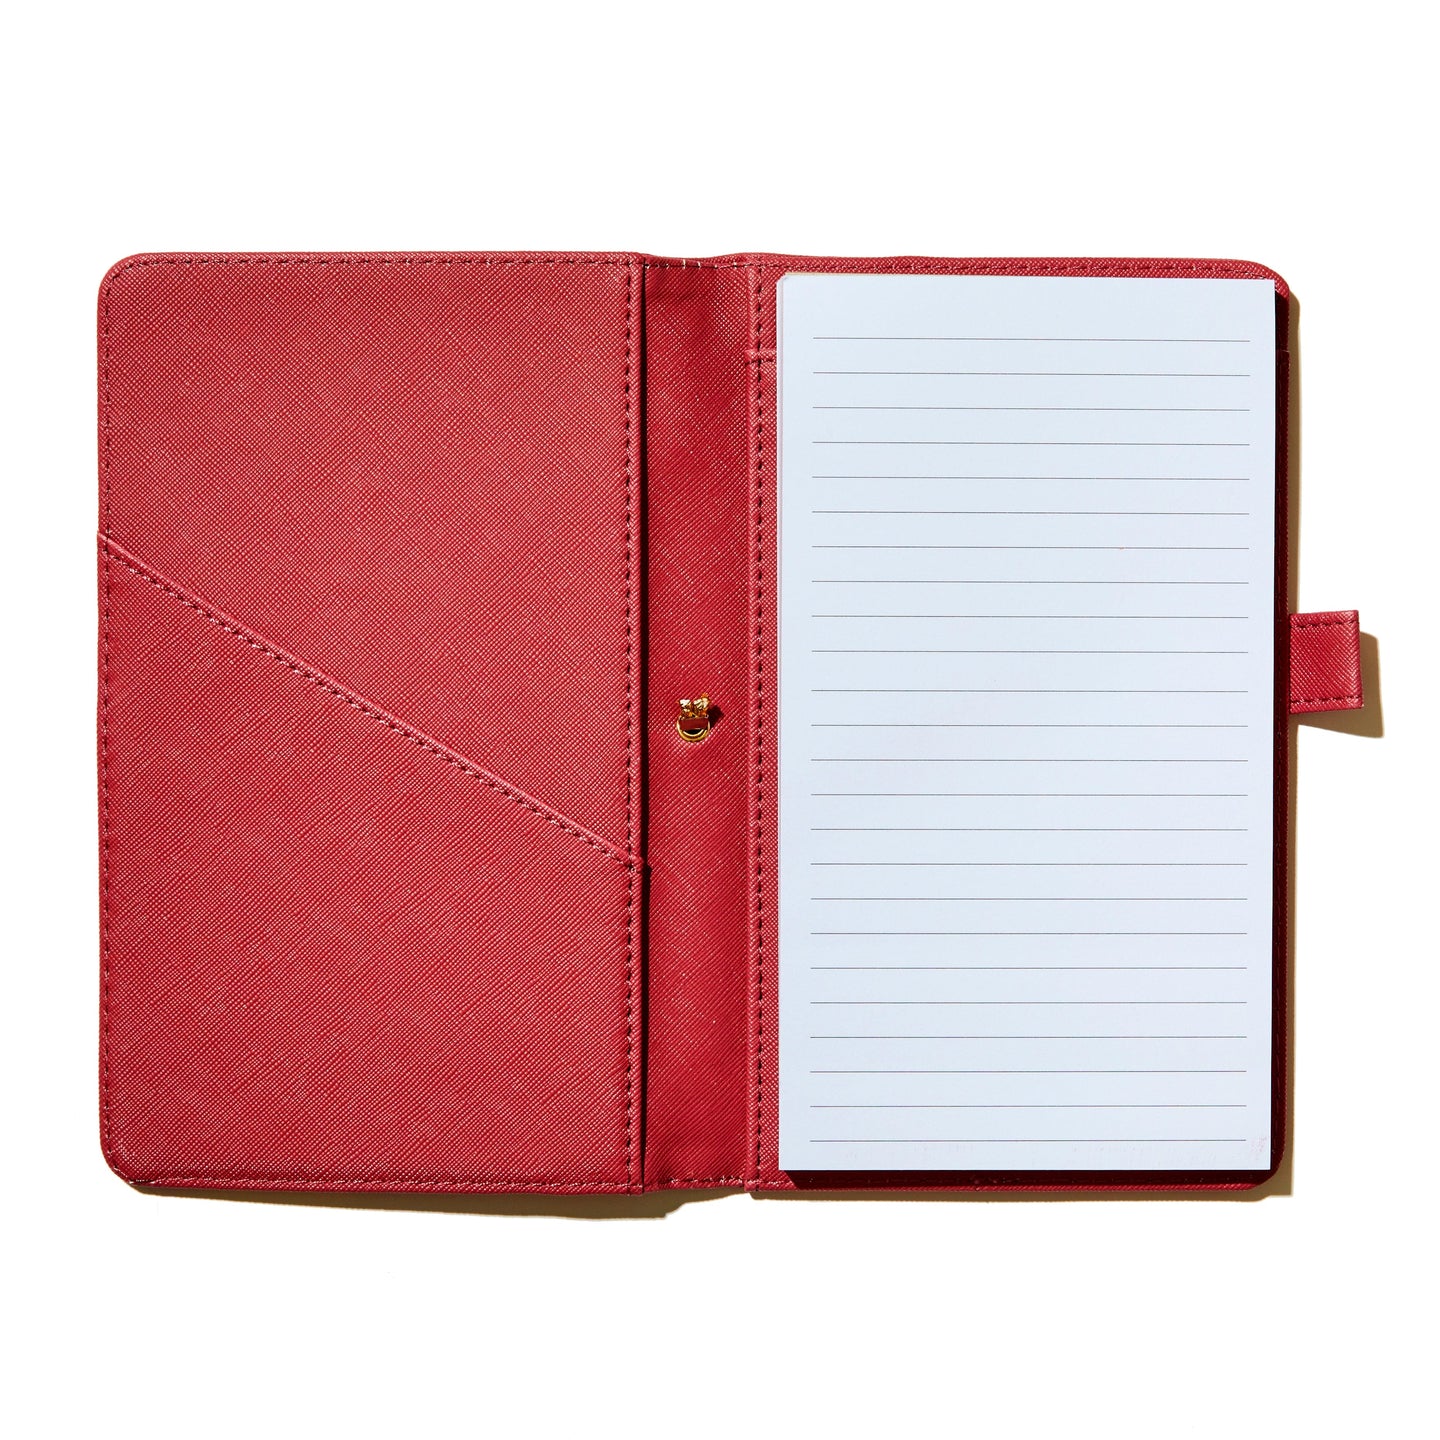 vegan leather gold tied padfolio + notepad - 5.5x11 - berry